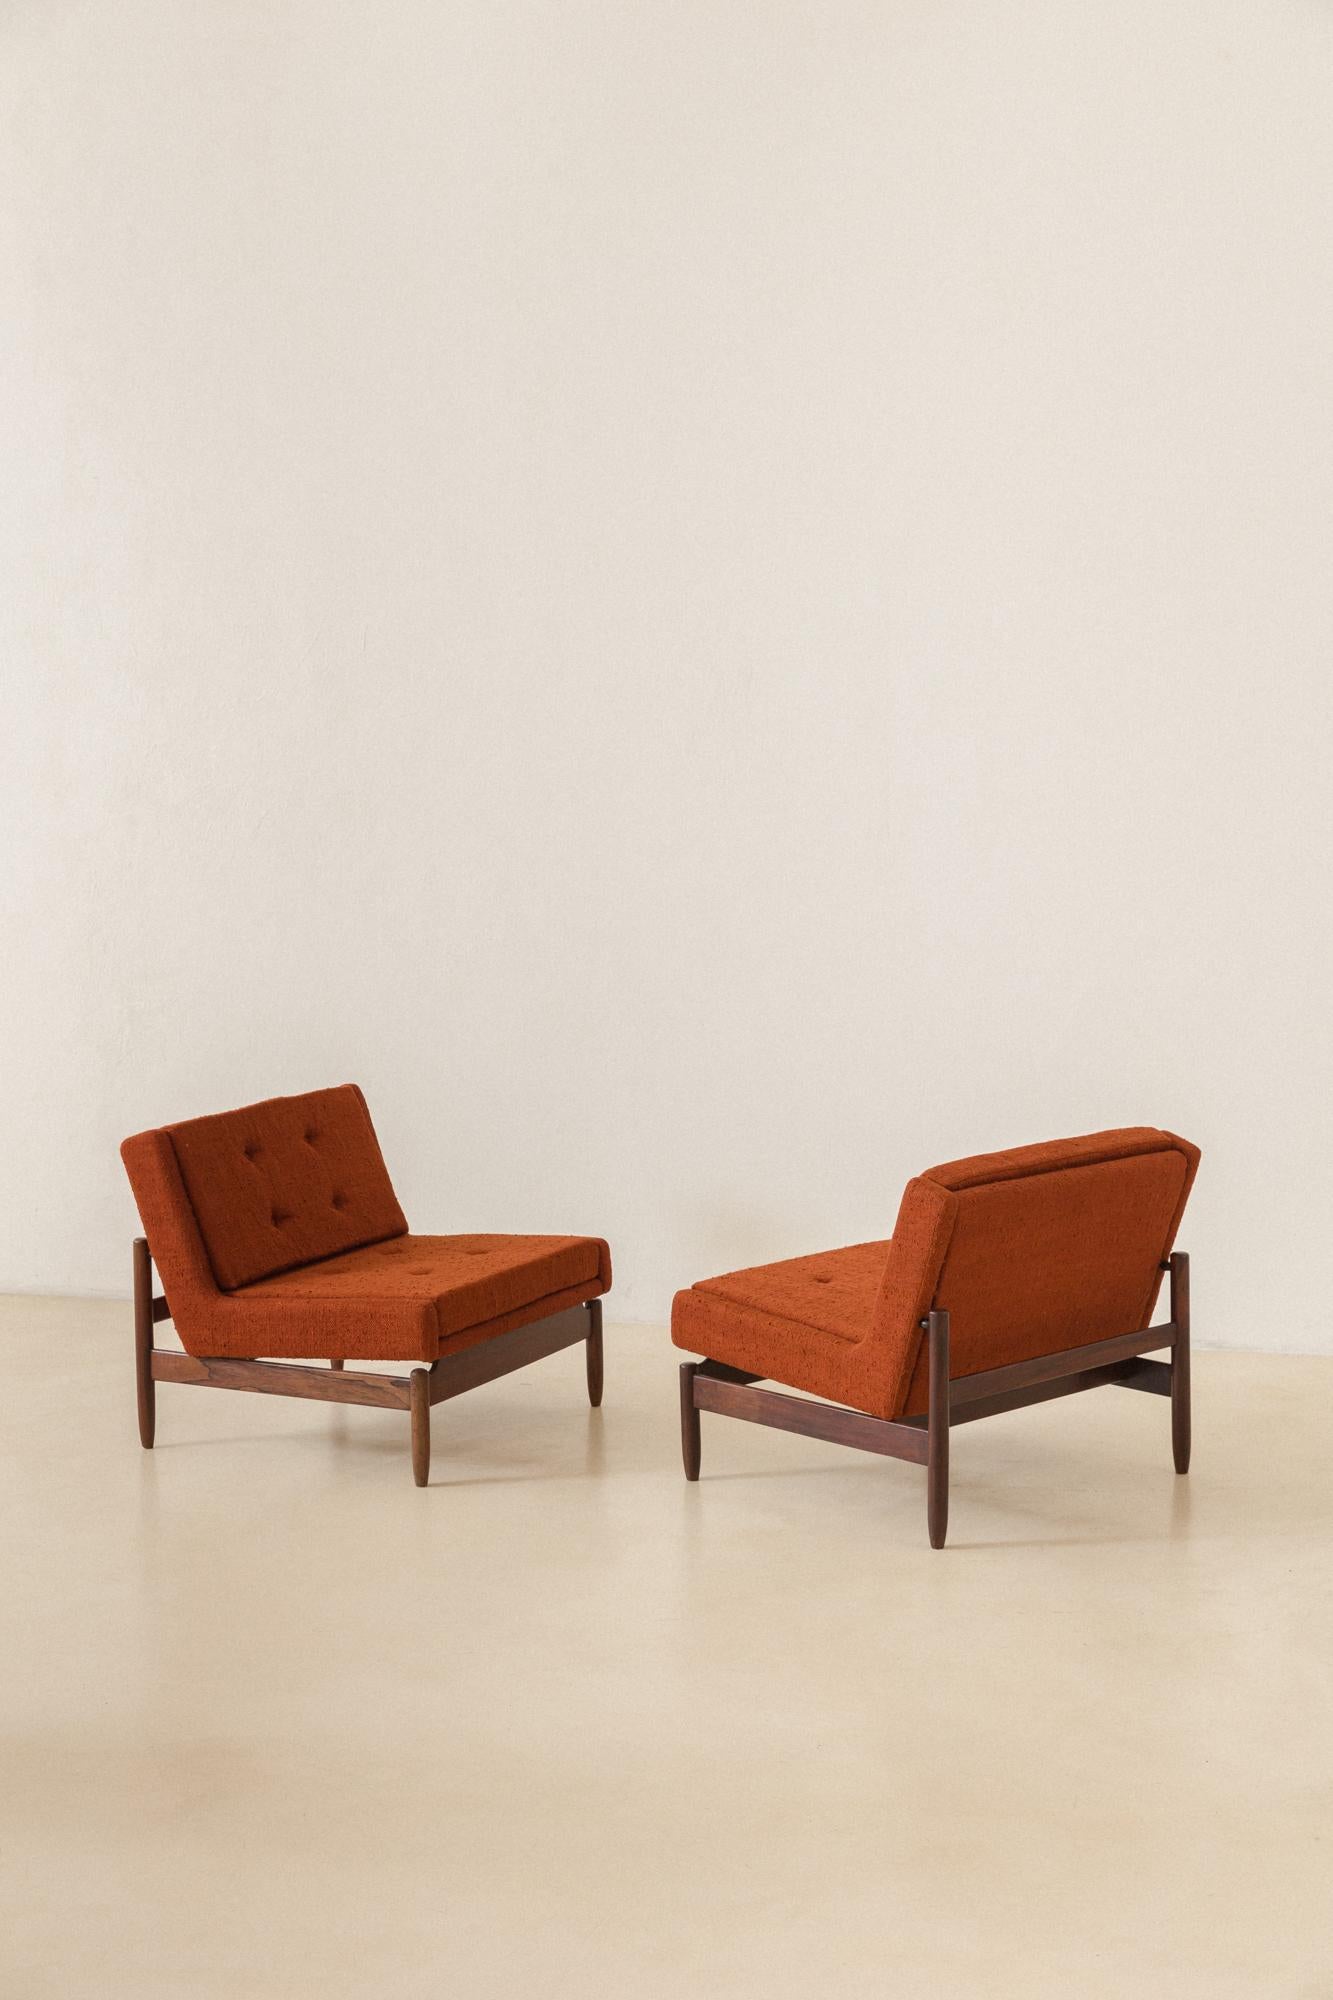 Hand-Crafted Rosewood Armchairs by Móveis Cantù, 1960s, Brazilian Midcentury For Sale